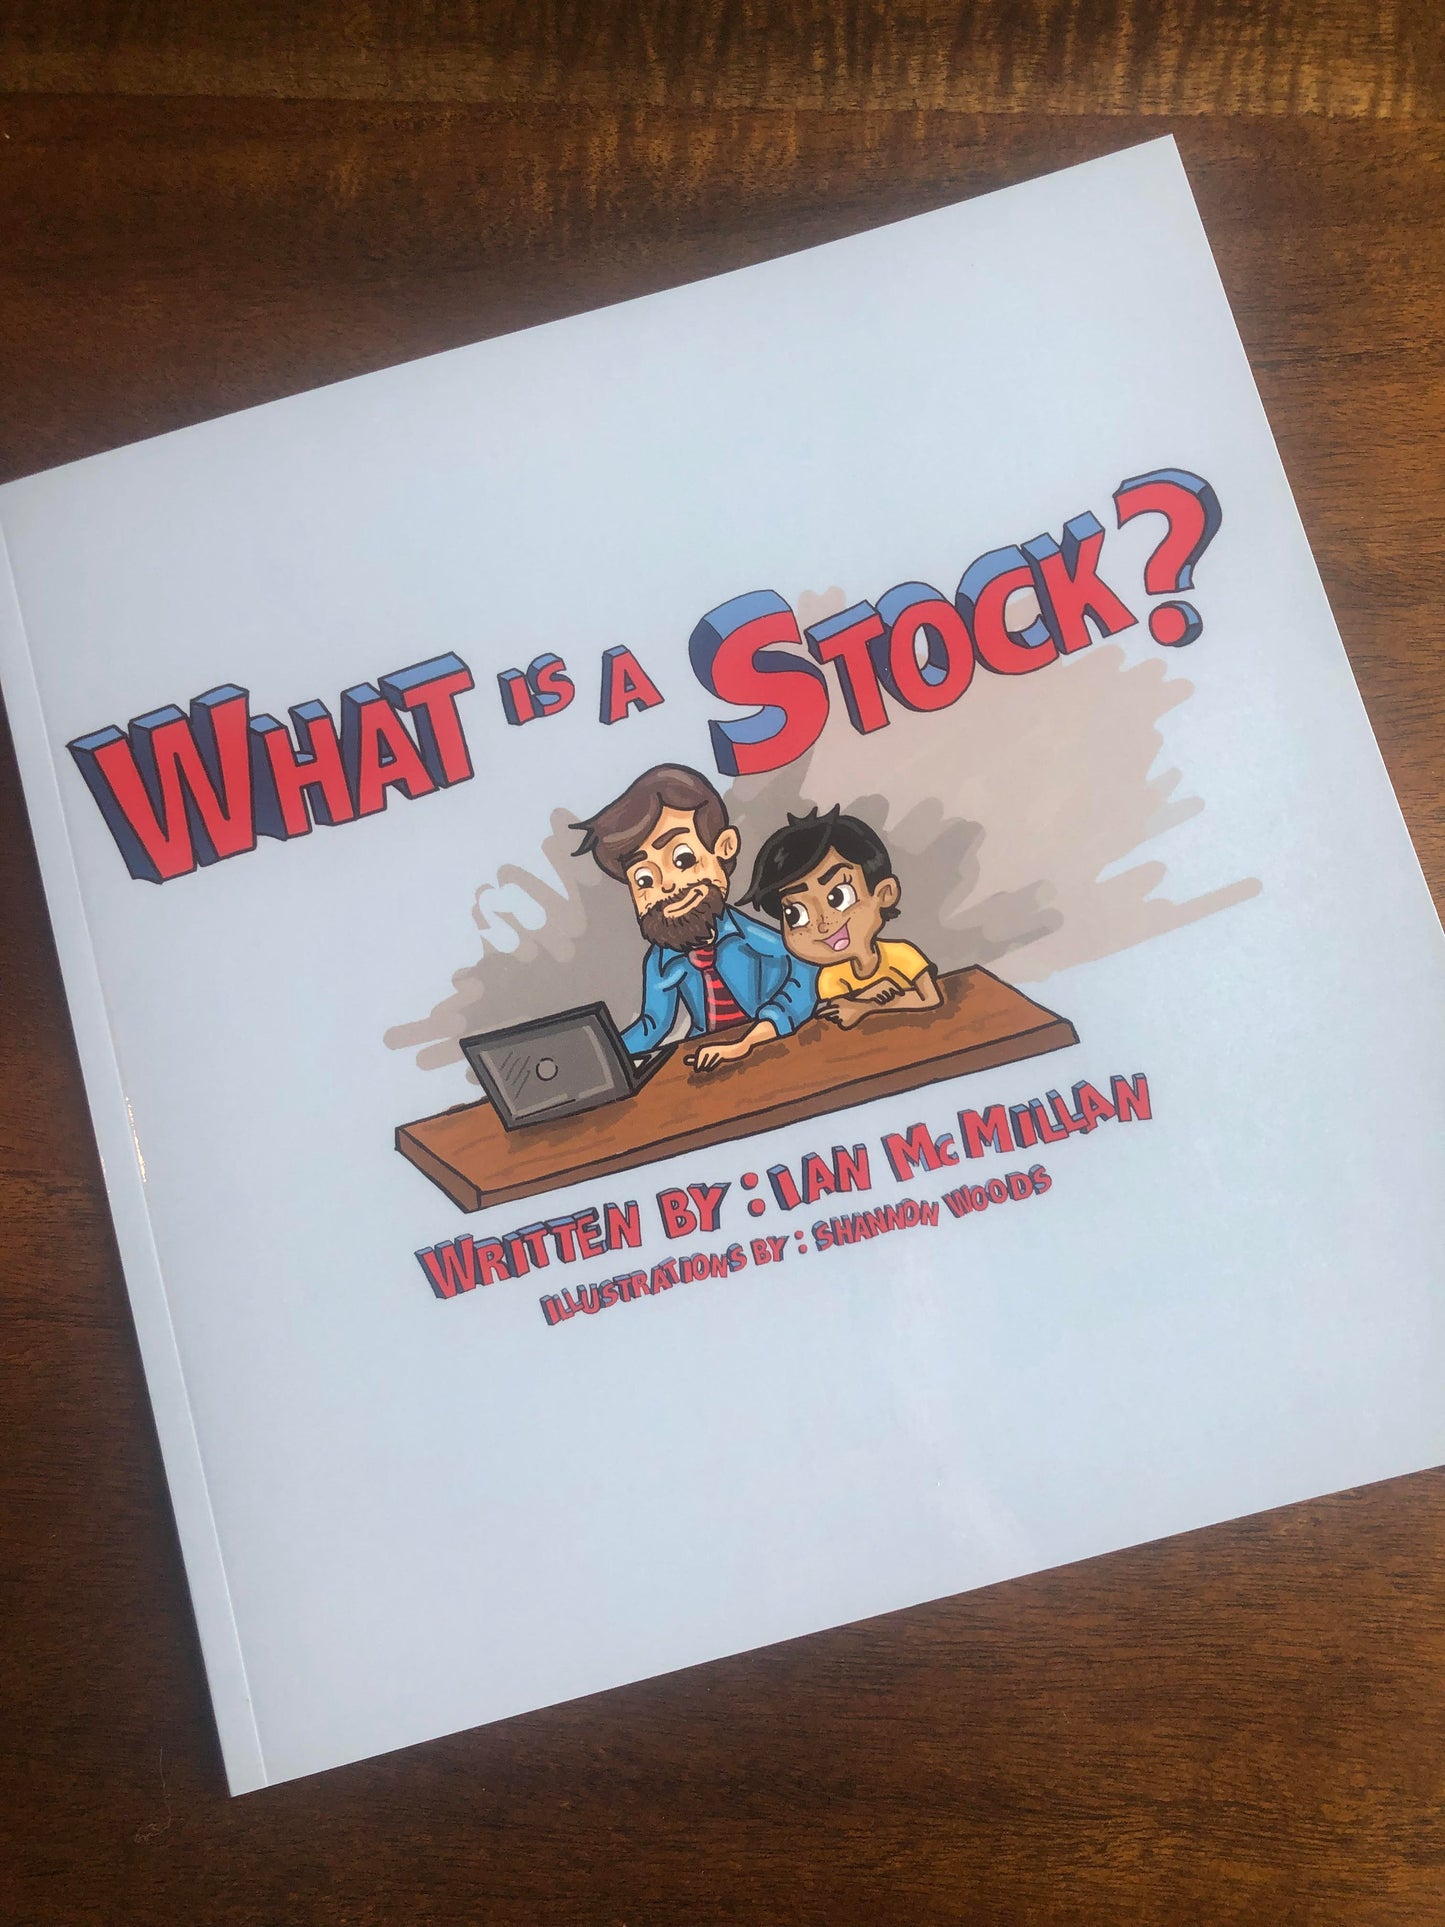 "What Is A Stock?"